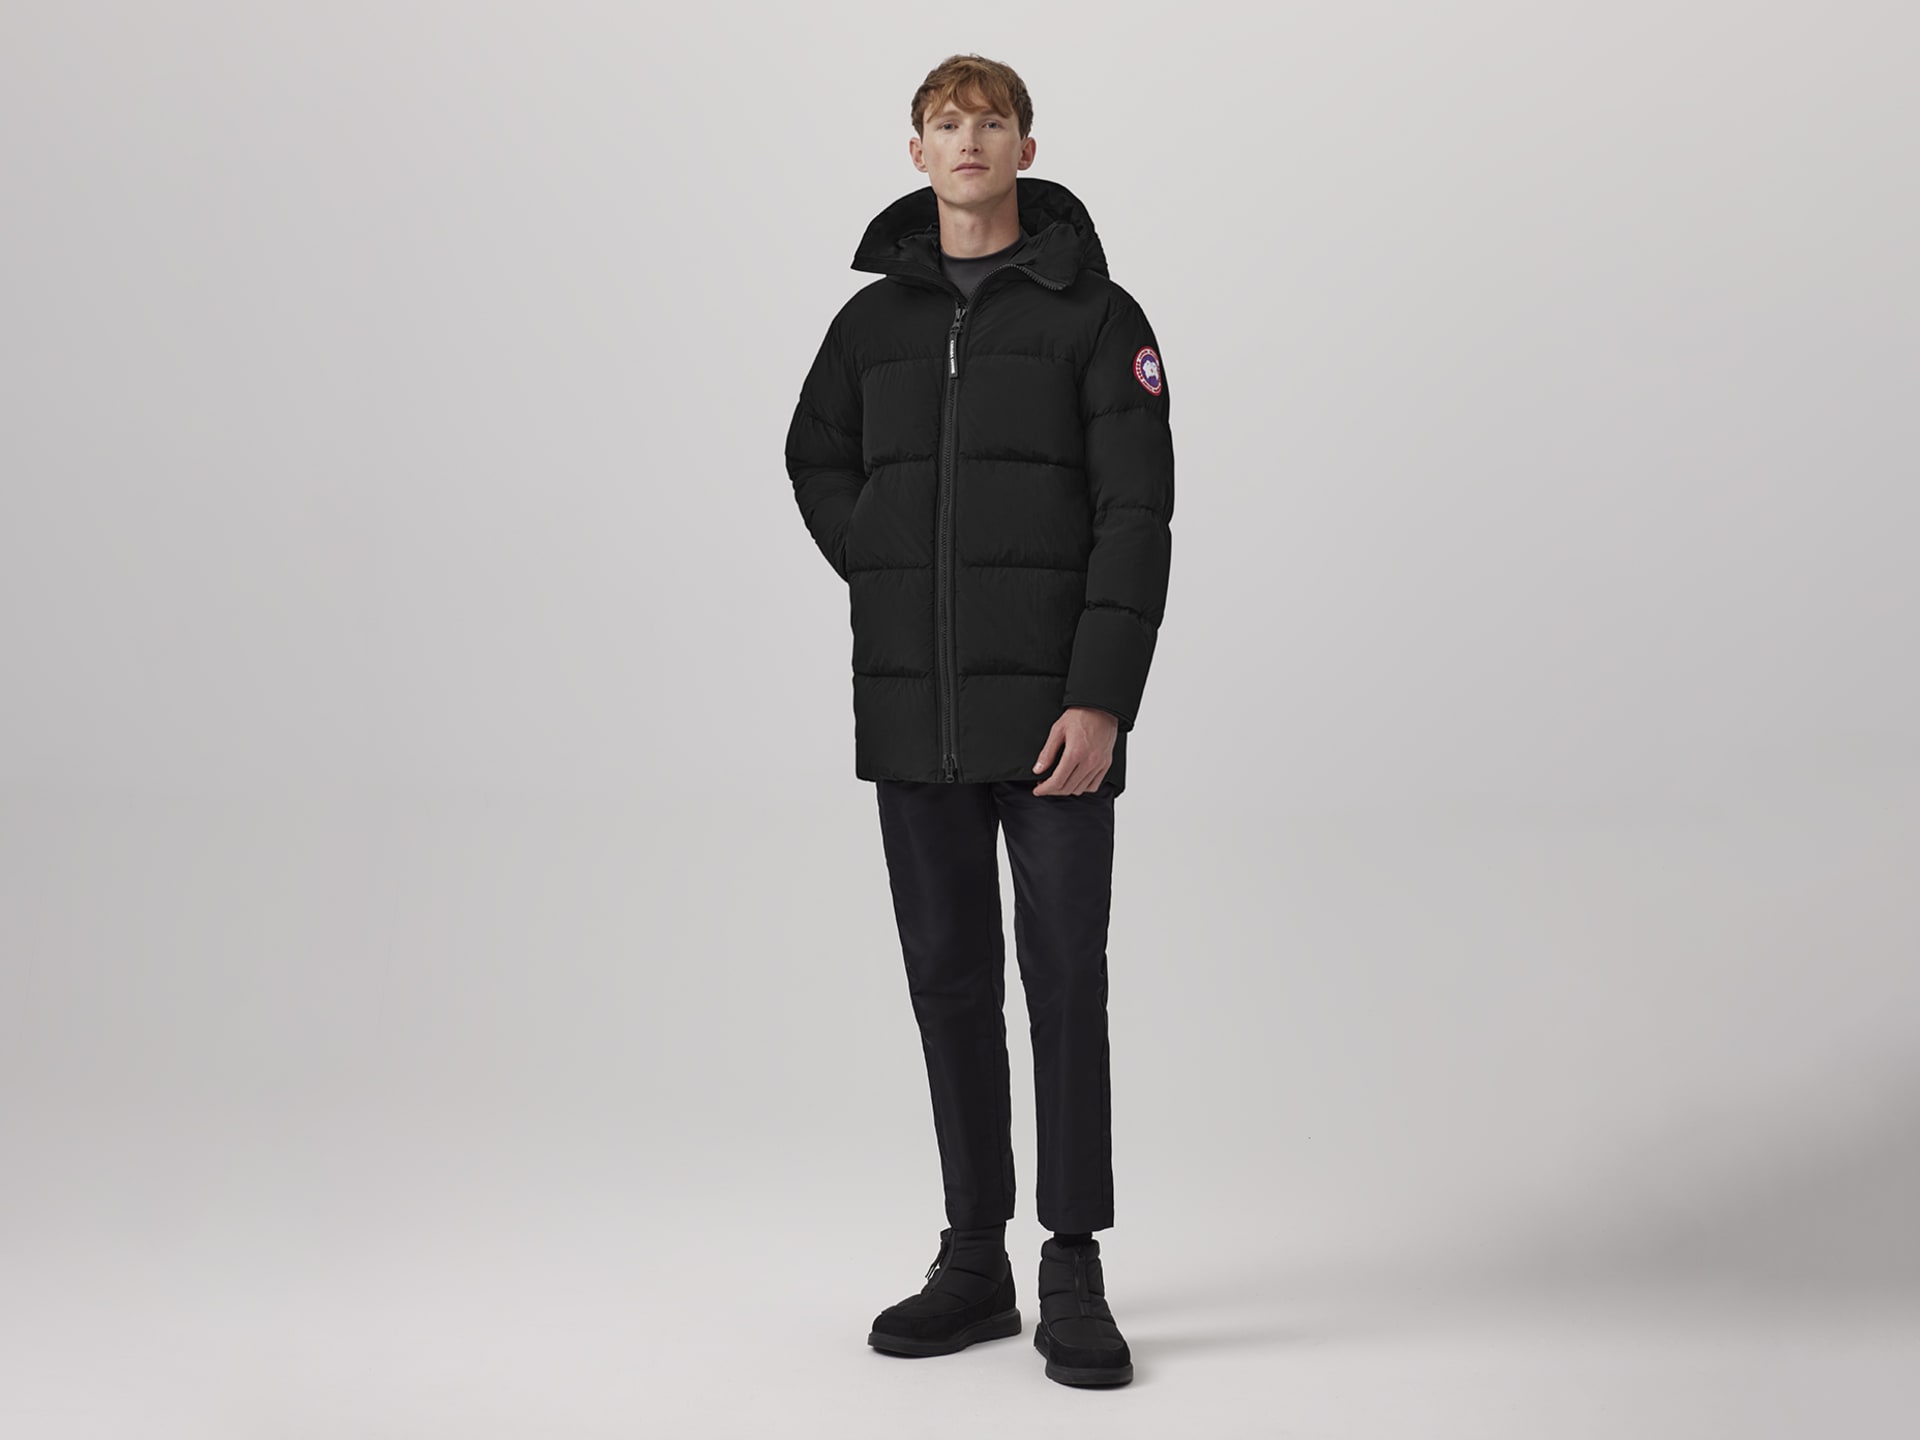 Unlock Wilderness' choice in the Burberry Vs Canada Goose comparison, the Lawrence Puffer by Canada Goose